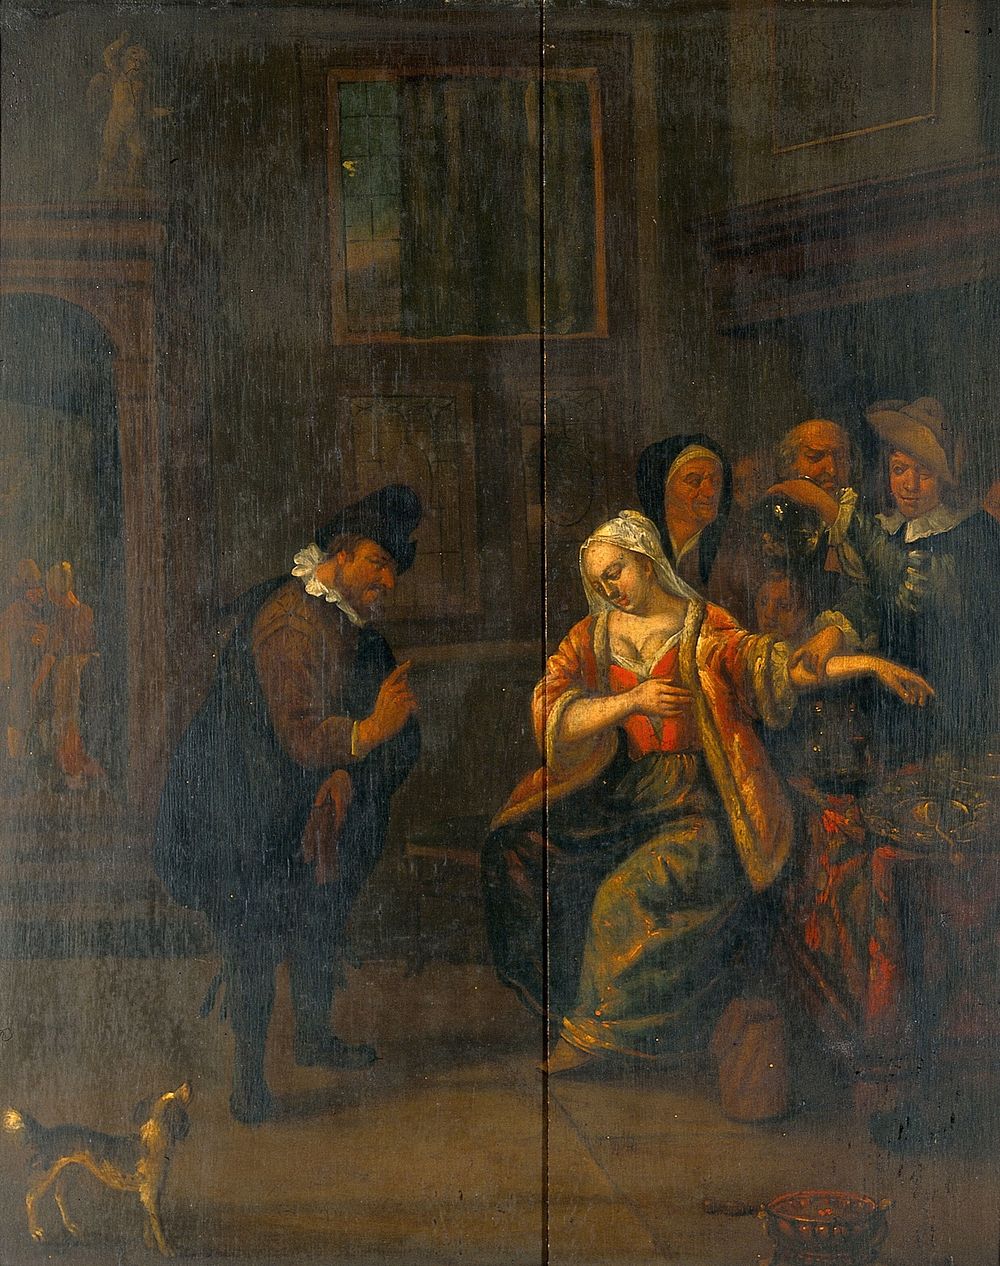 A medical practitioner examines the urine and takes the pulse of a woman, while another man gives her advice. Oil painting…